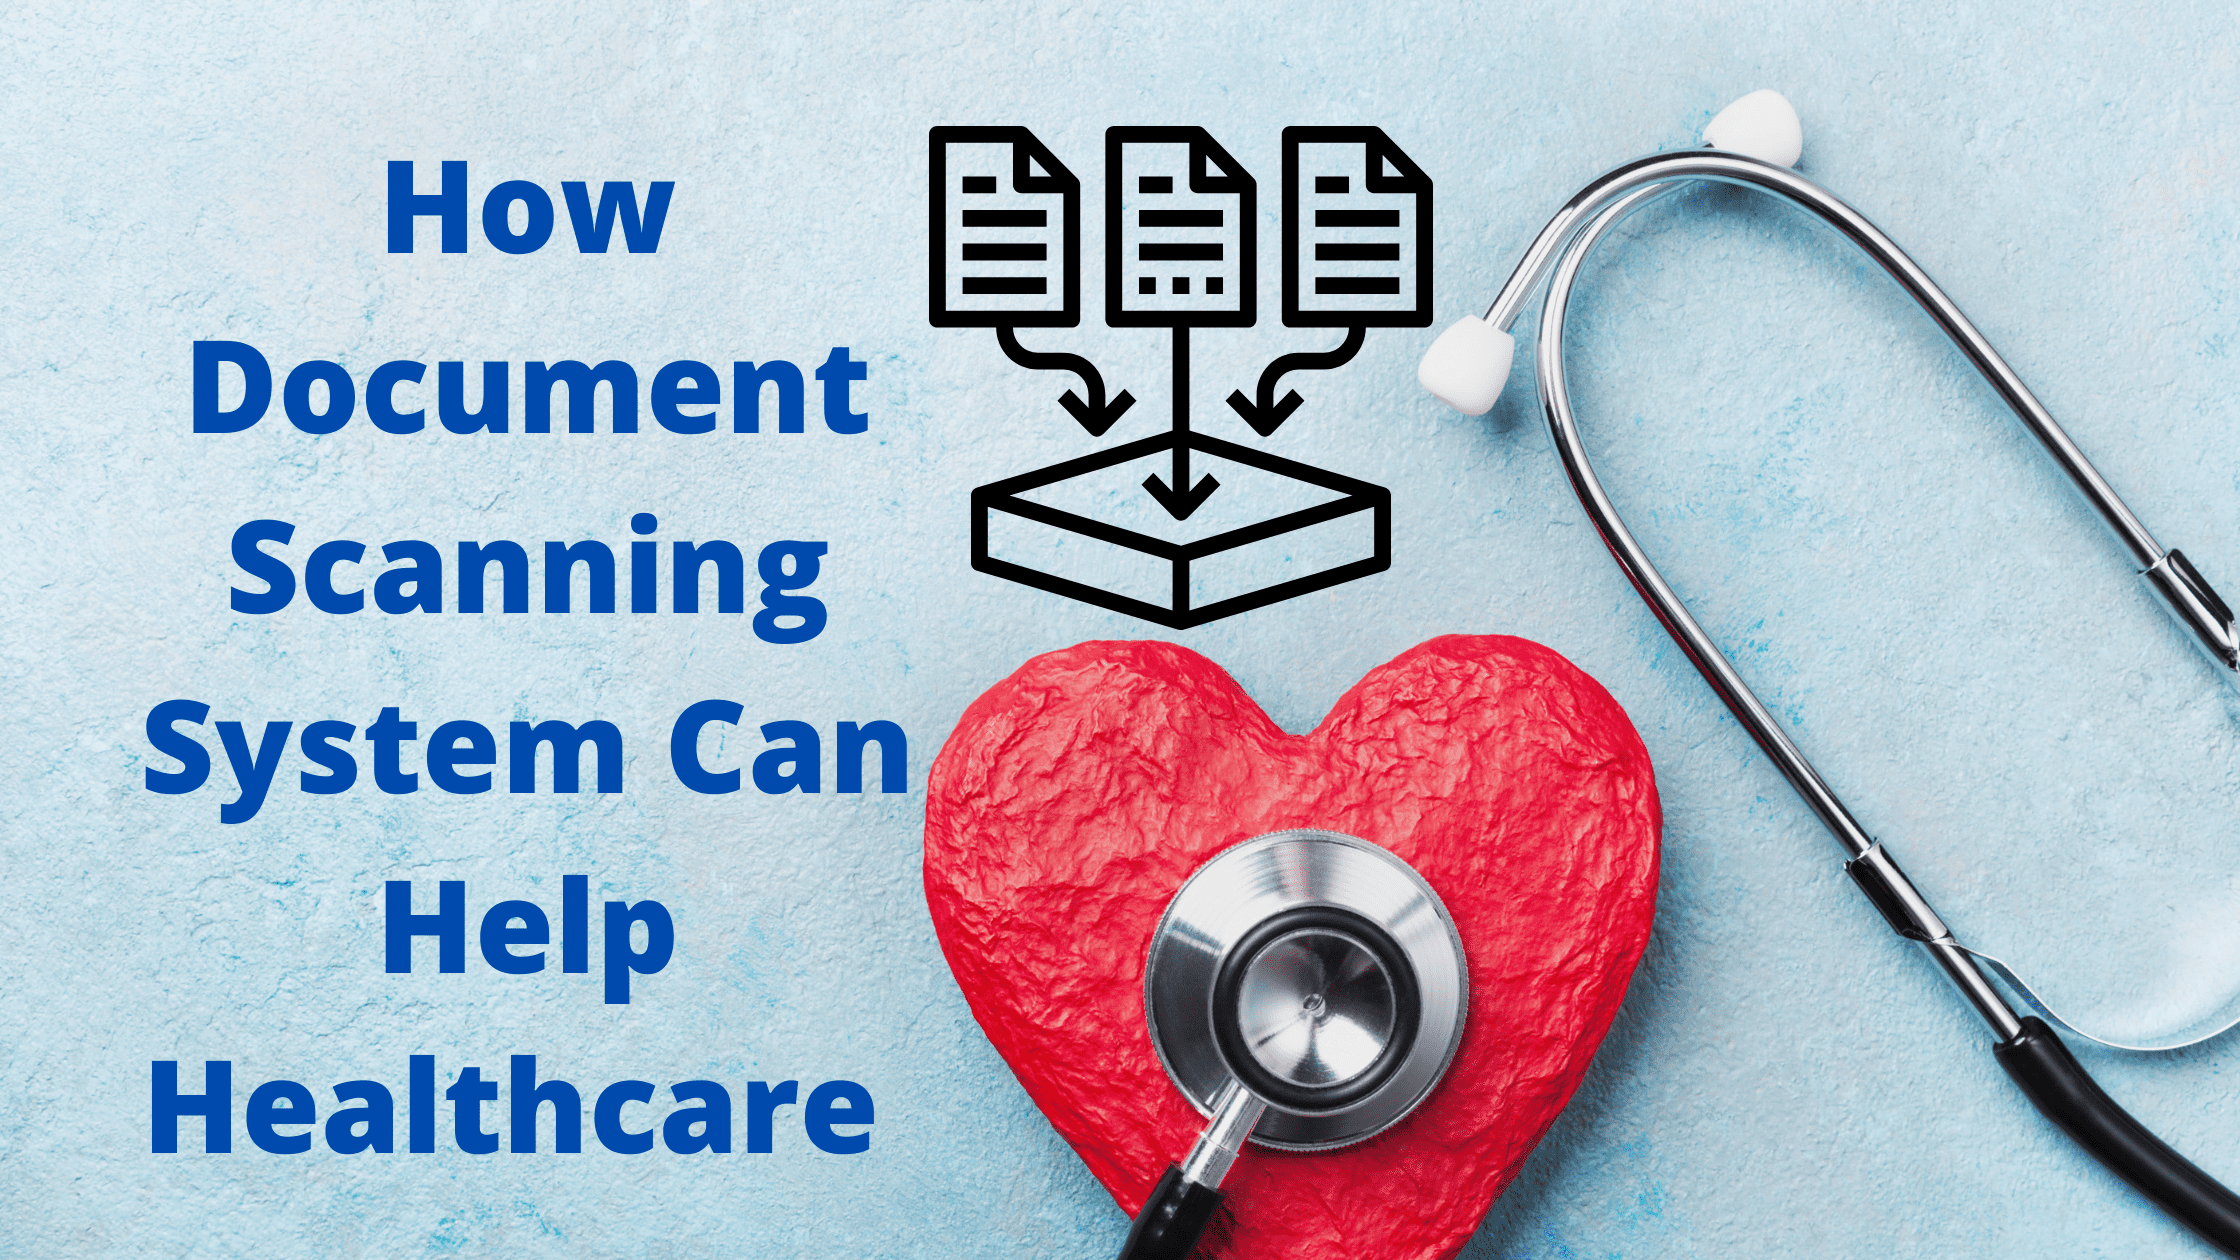 How Document Scanning System Can Help Healthcare Industry?